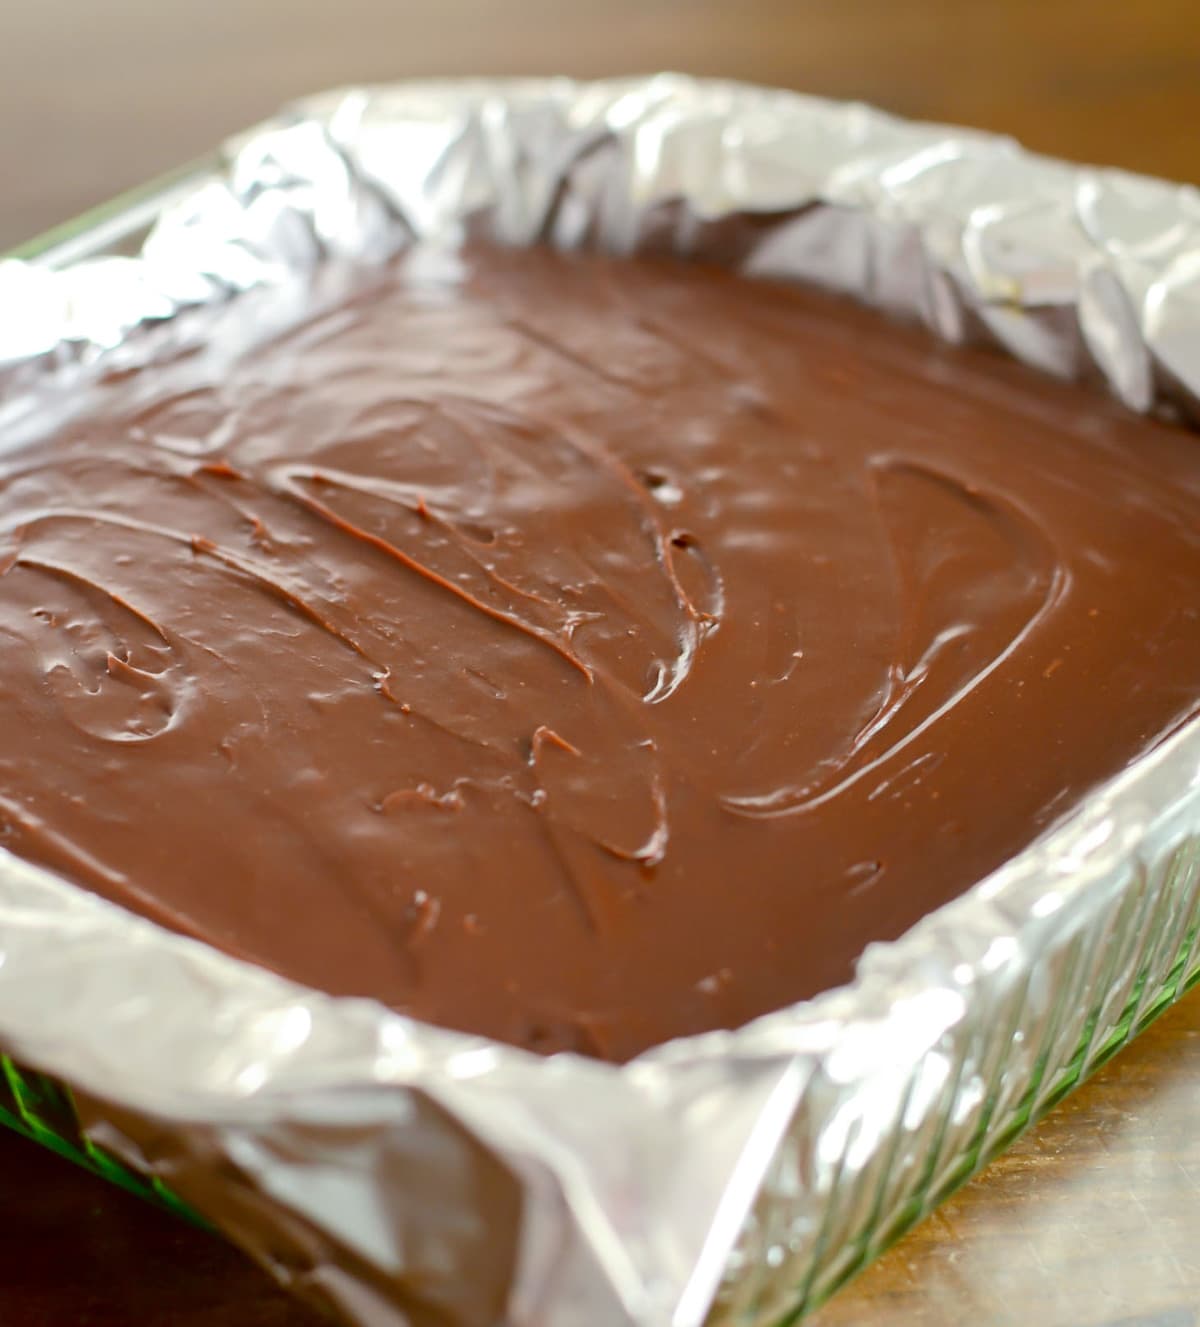 Nutella topped chocolate brownies in a baking dish lined with foil